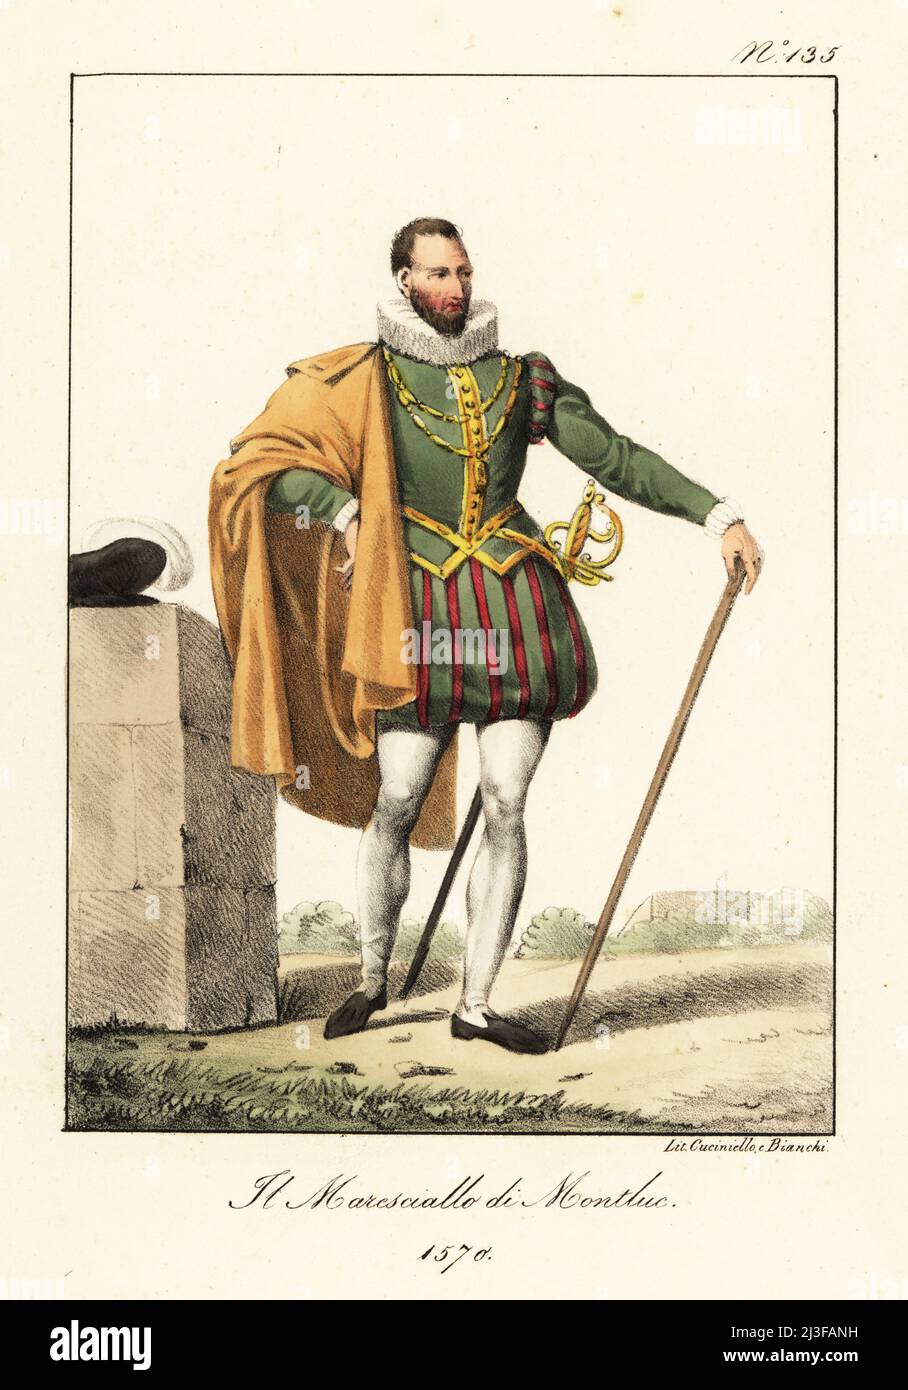 Blaise de Monluc, seigneur de Montluc, c. 1502-1577. Professional soldier appointed Marshal of France in 1574. In large ruff, short cape, doublet and breeches, hose, armed with sword and cane. Le Marechal de Montluc, 1570. Handcoloured lithograph by Lorenzo Bianchi and Domenico Cuciniello after Hippolyte Lecomte from Costumi civili e militari della monarchia francese dal 1200 al 1820, Naples, 1825. Italian edition of Lecomte’s Civilian and military costumes of the French monarchy from 1200 to 1820. Stock Photo